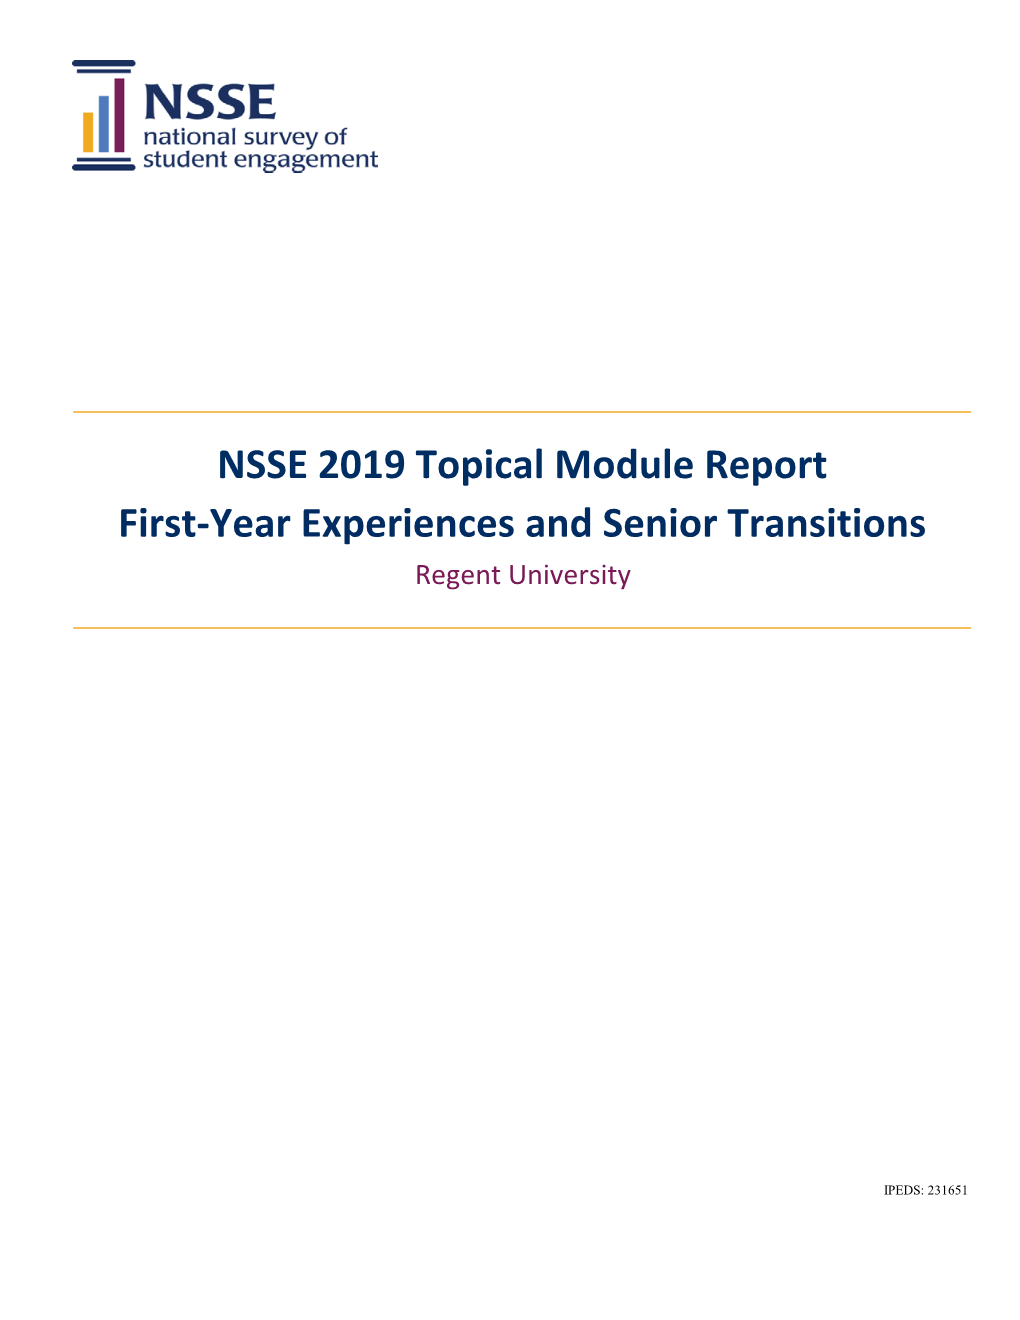 NSSE 2019 Topical Module Report First-Year Experiences and Senior Transitions Regent University